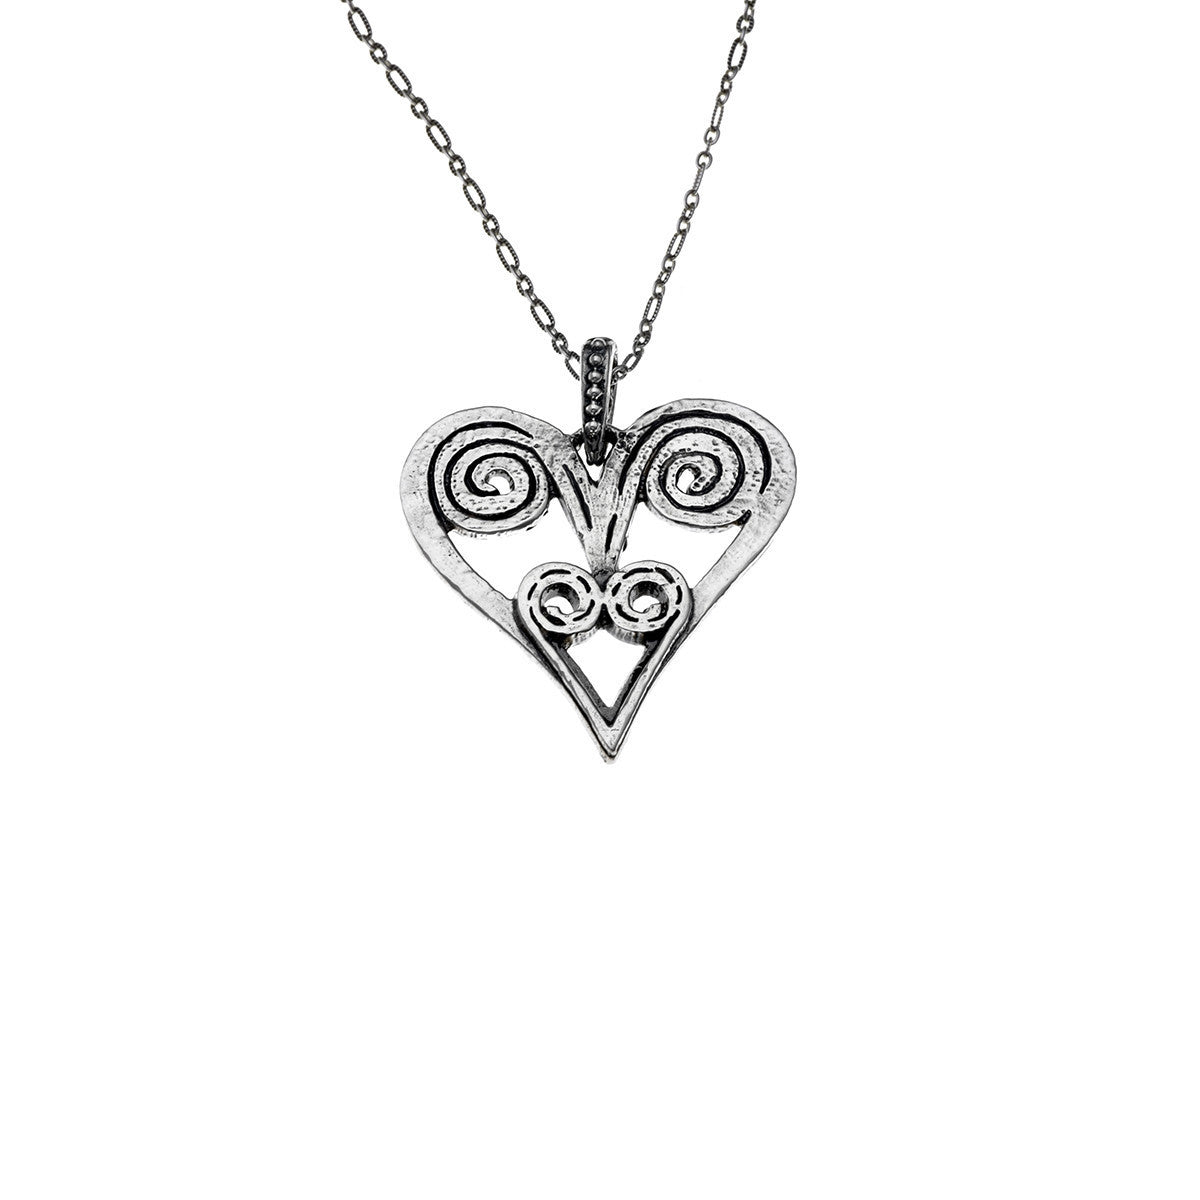 Barnes Metalwork Heart Sterling Silver Necklace - Cynthia Gale New York Jewelry